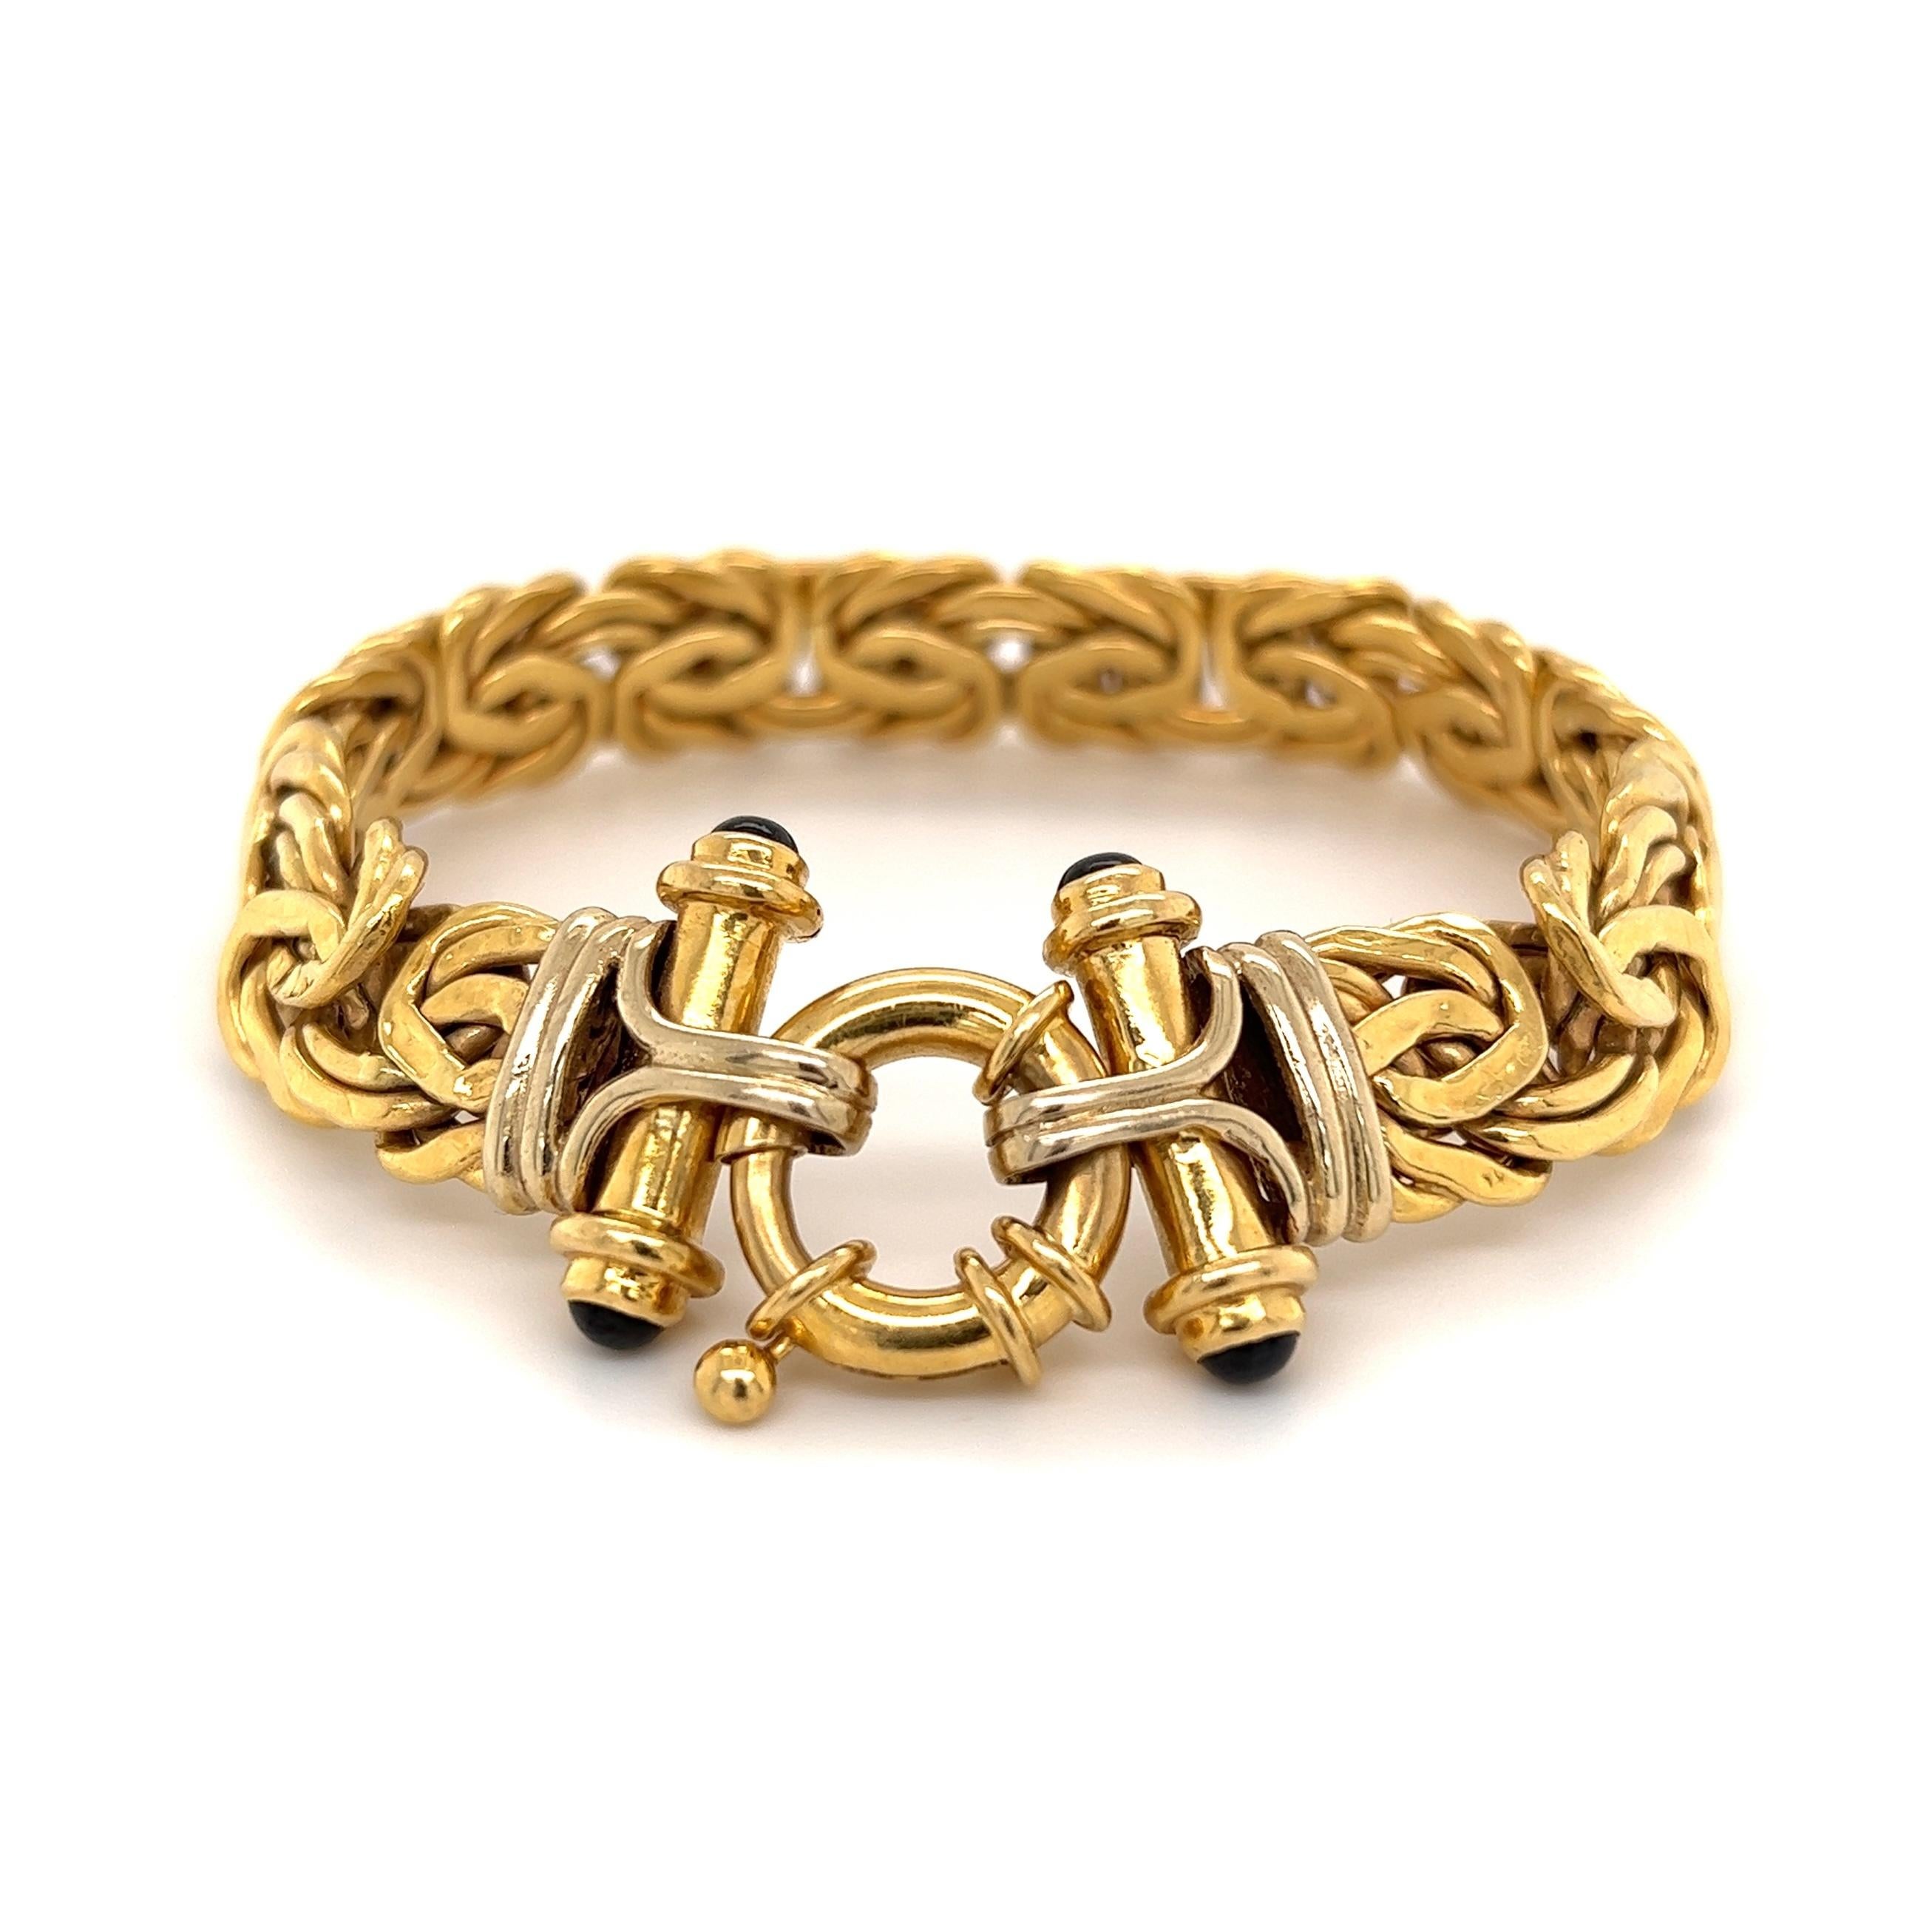 Simply Beautiful! High Quality Deluxe Weave Link Gold Bracelet with Onyx set Toggle Clasp. Approx. 7.25